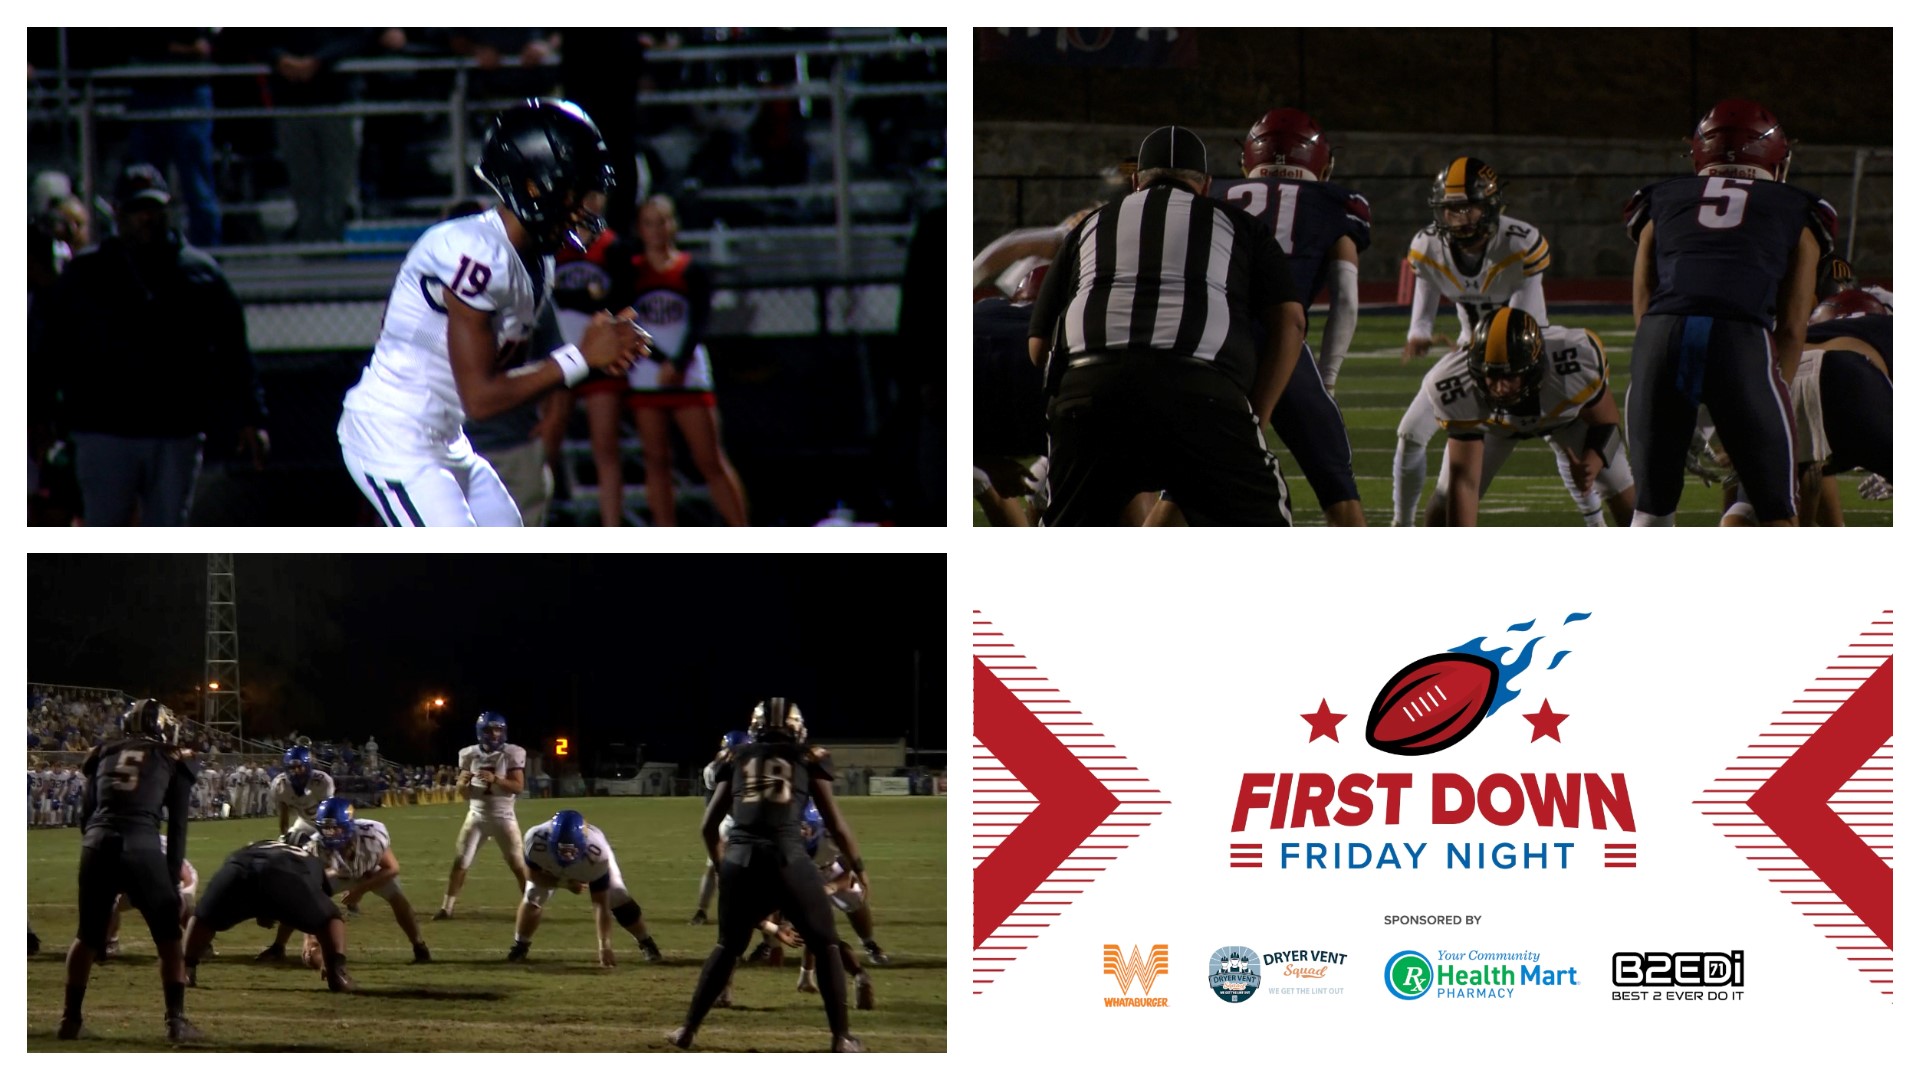 The road to the AHSAA Super 7 continued tonight with 2nd  round playoff action across the state. We've got a slew of scores and highlights on First Down Friday Night